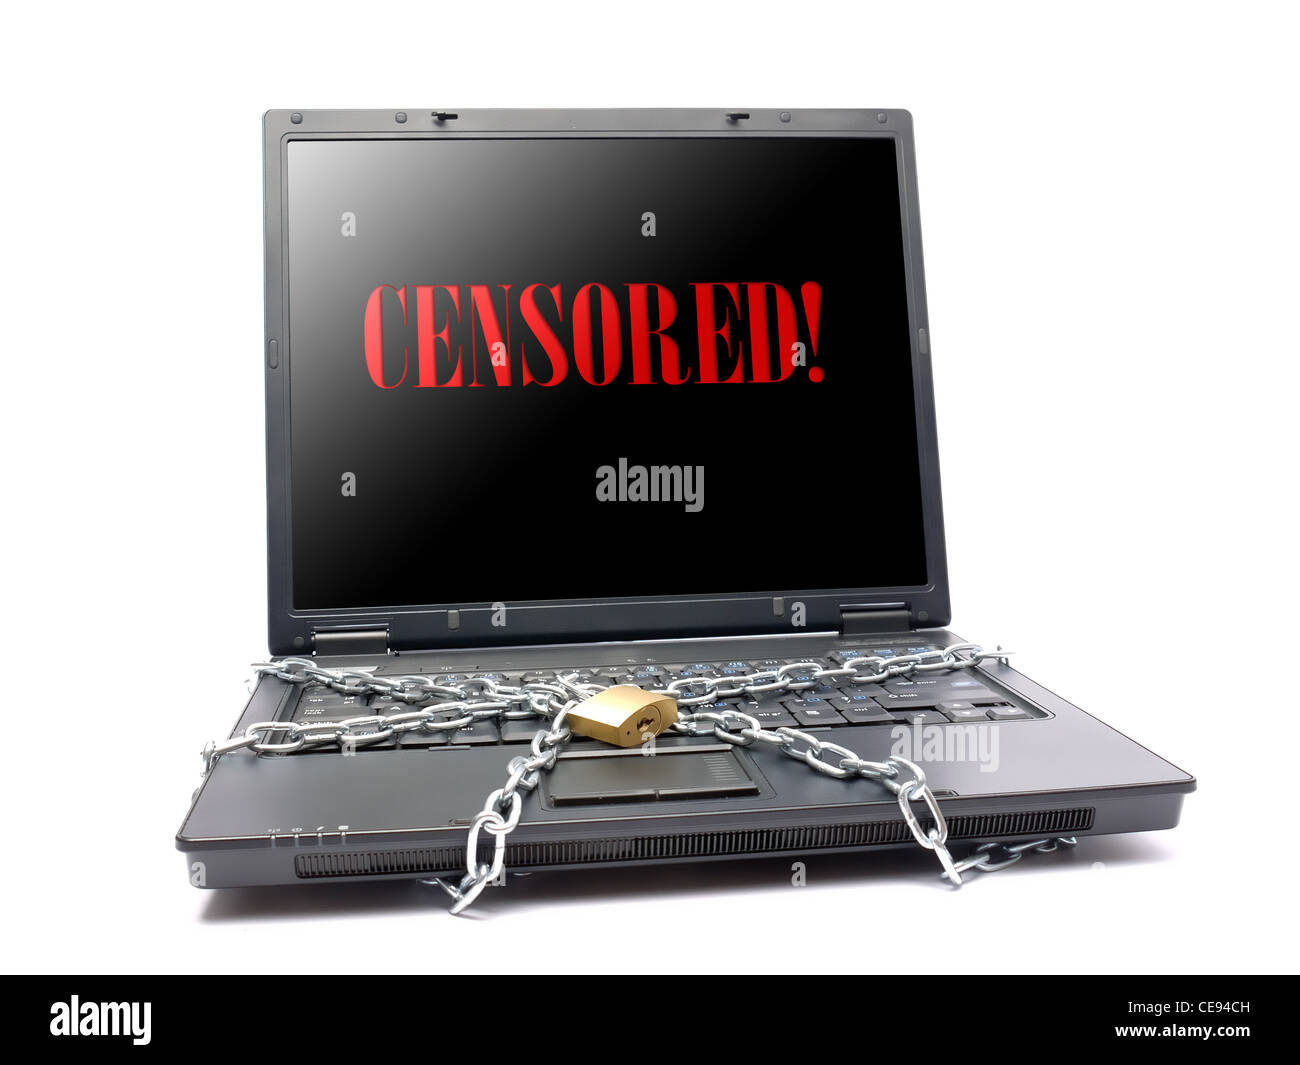 Laptop in chain with red word Censored displayed on the screen - Censorship concept Stock Photo